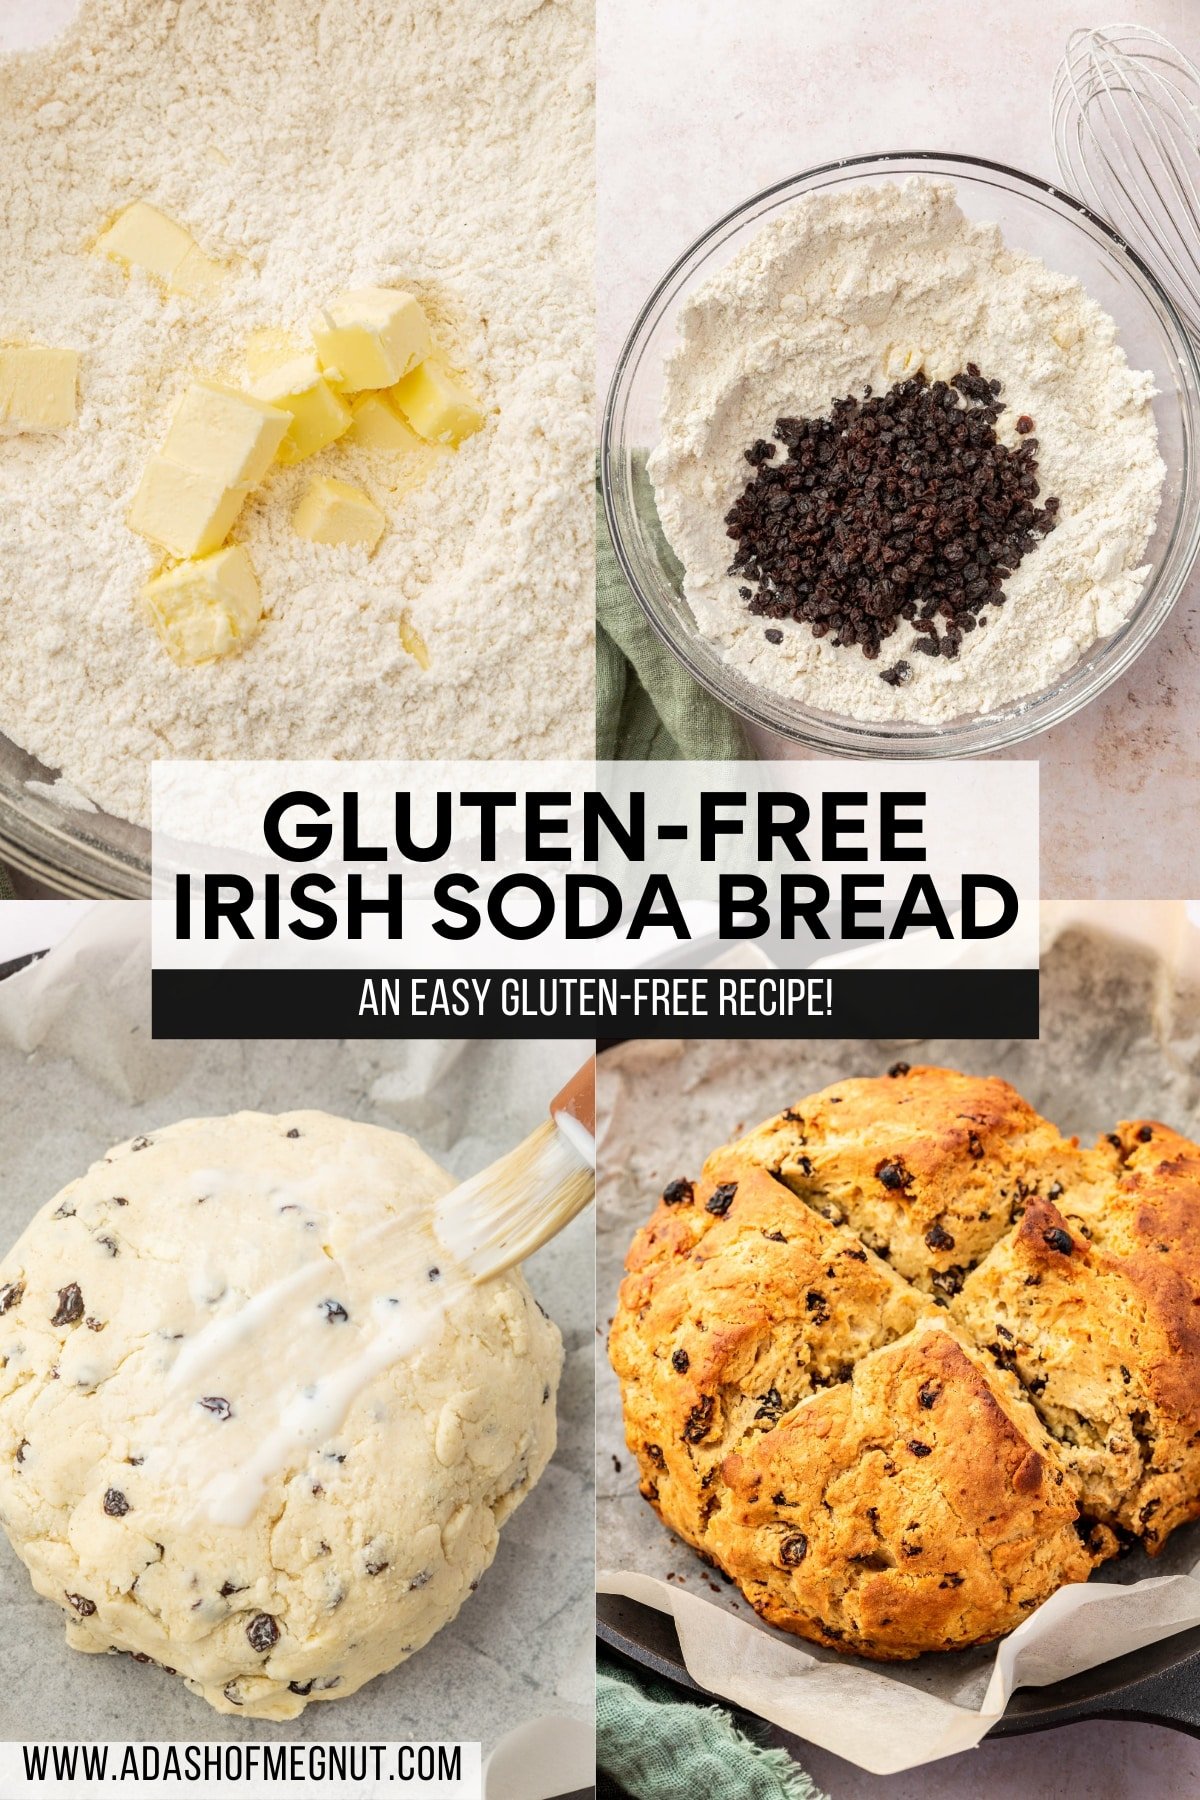 A four photo collage showing the process of making gluten-free Irish soda bread. Photo 1: Cubed cold butter in a bowl of gluten-free flour. Photo 2: A glass mixing bowl filled with gluten-free flour and topped with a pile of currants. Photo 3: A lump of Irish soda bread dough being topped with buttermilk by a pastry brush. Photo 4: A loaf of gluten-free Irish soda bread in a parchment paper lined cast iron skillet.